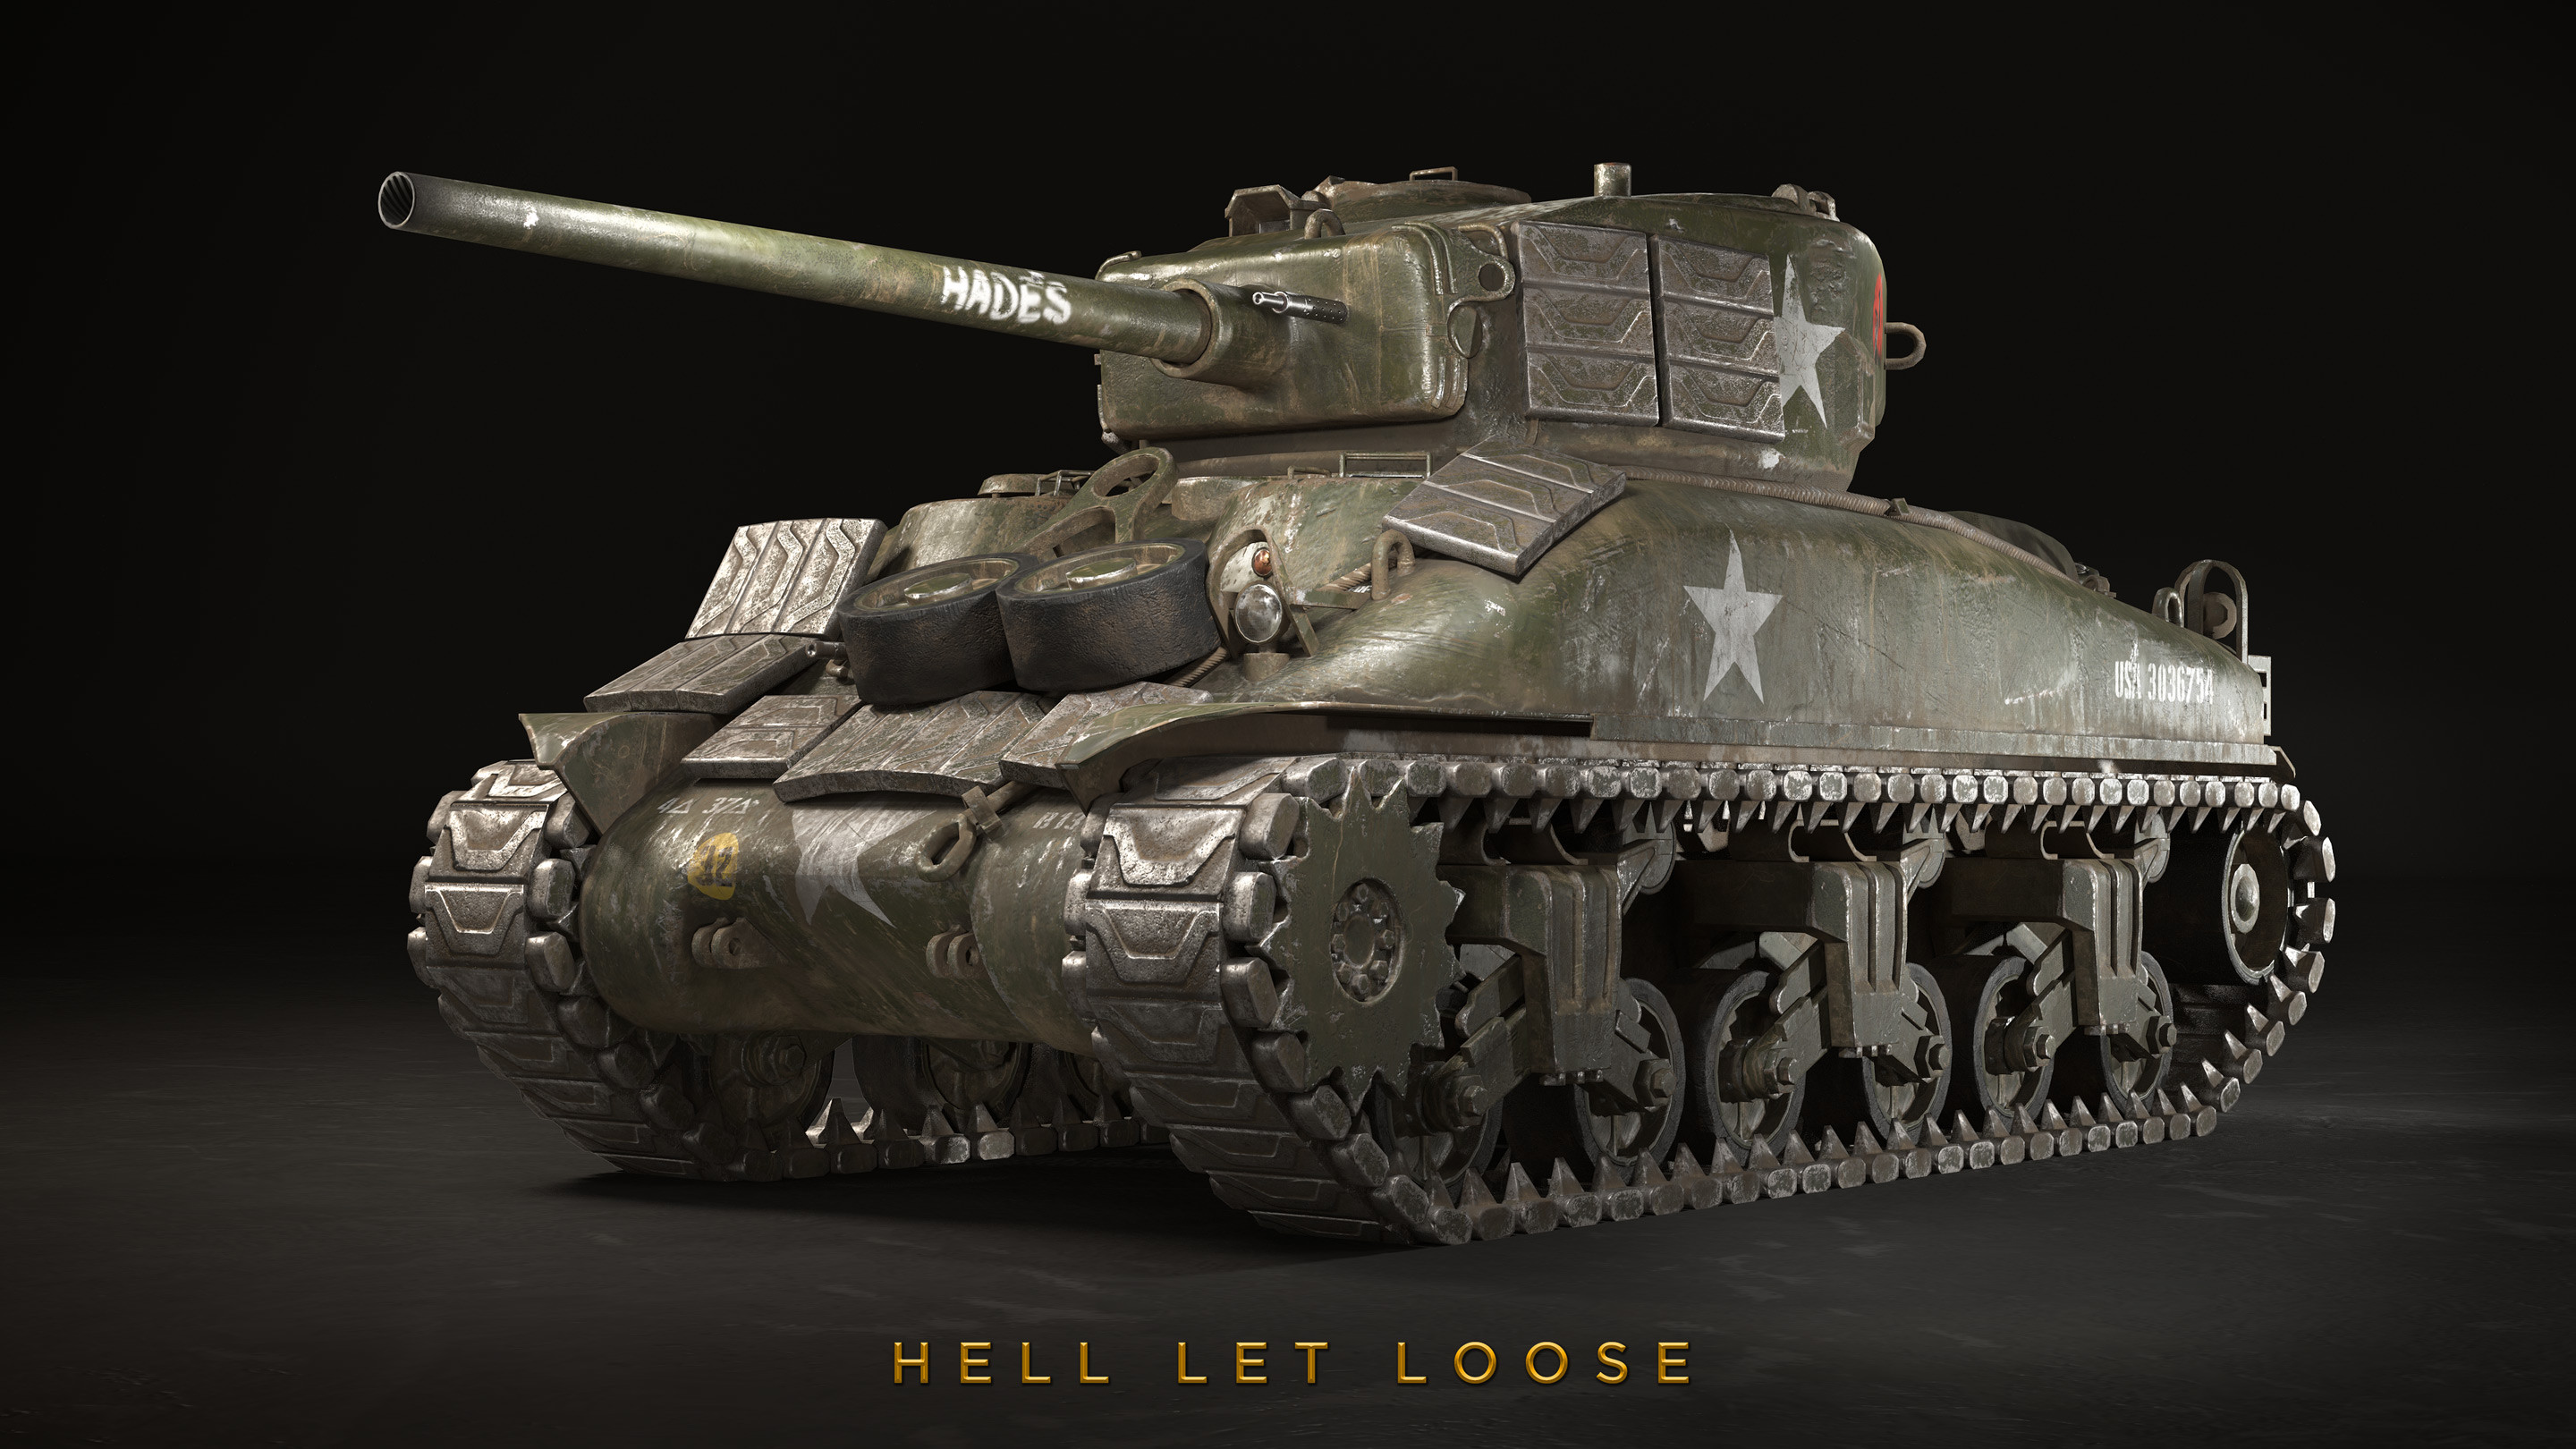 https://static.wikia.nocookie.net/hellletloose/images/7/77/%28official%29_m4a1_sherman.jpg/revision/latest?cb=20201227204129